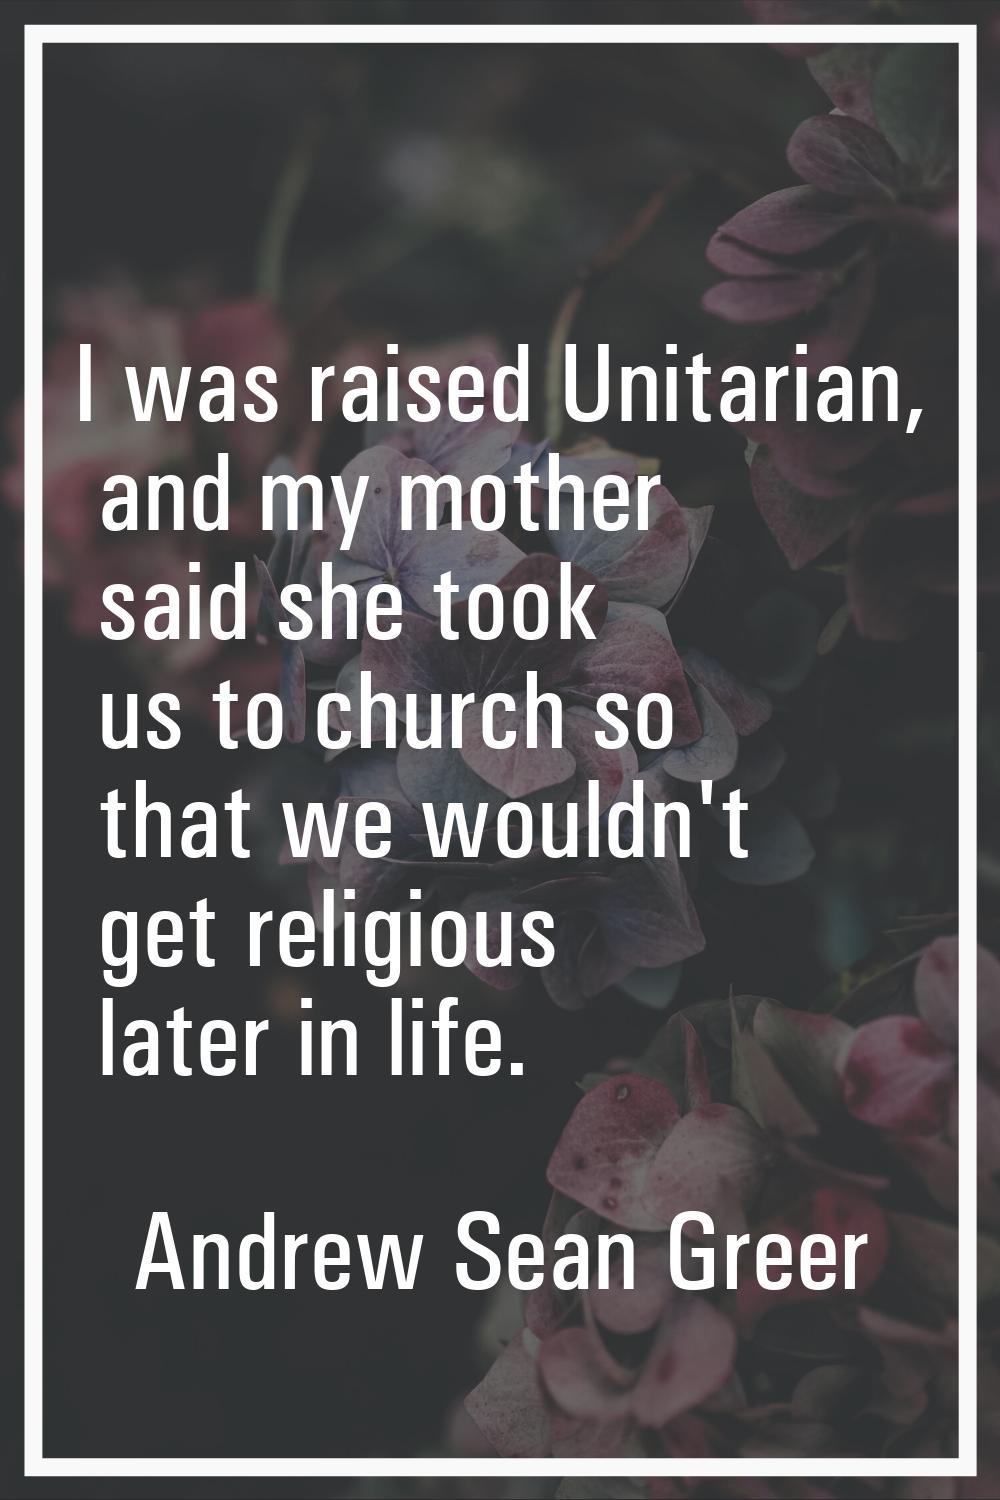 I was raised Unitarian, and my mother said she took us to church so that we wouldn't get religious 